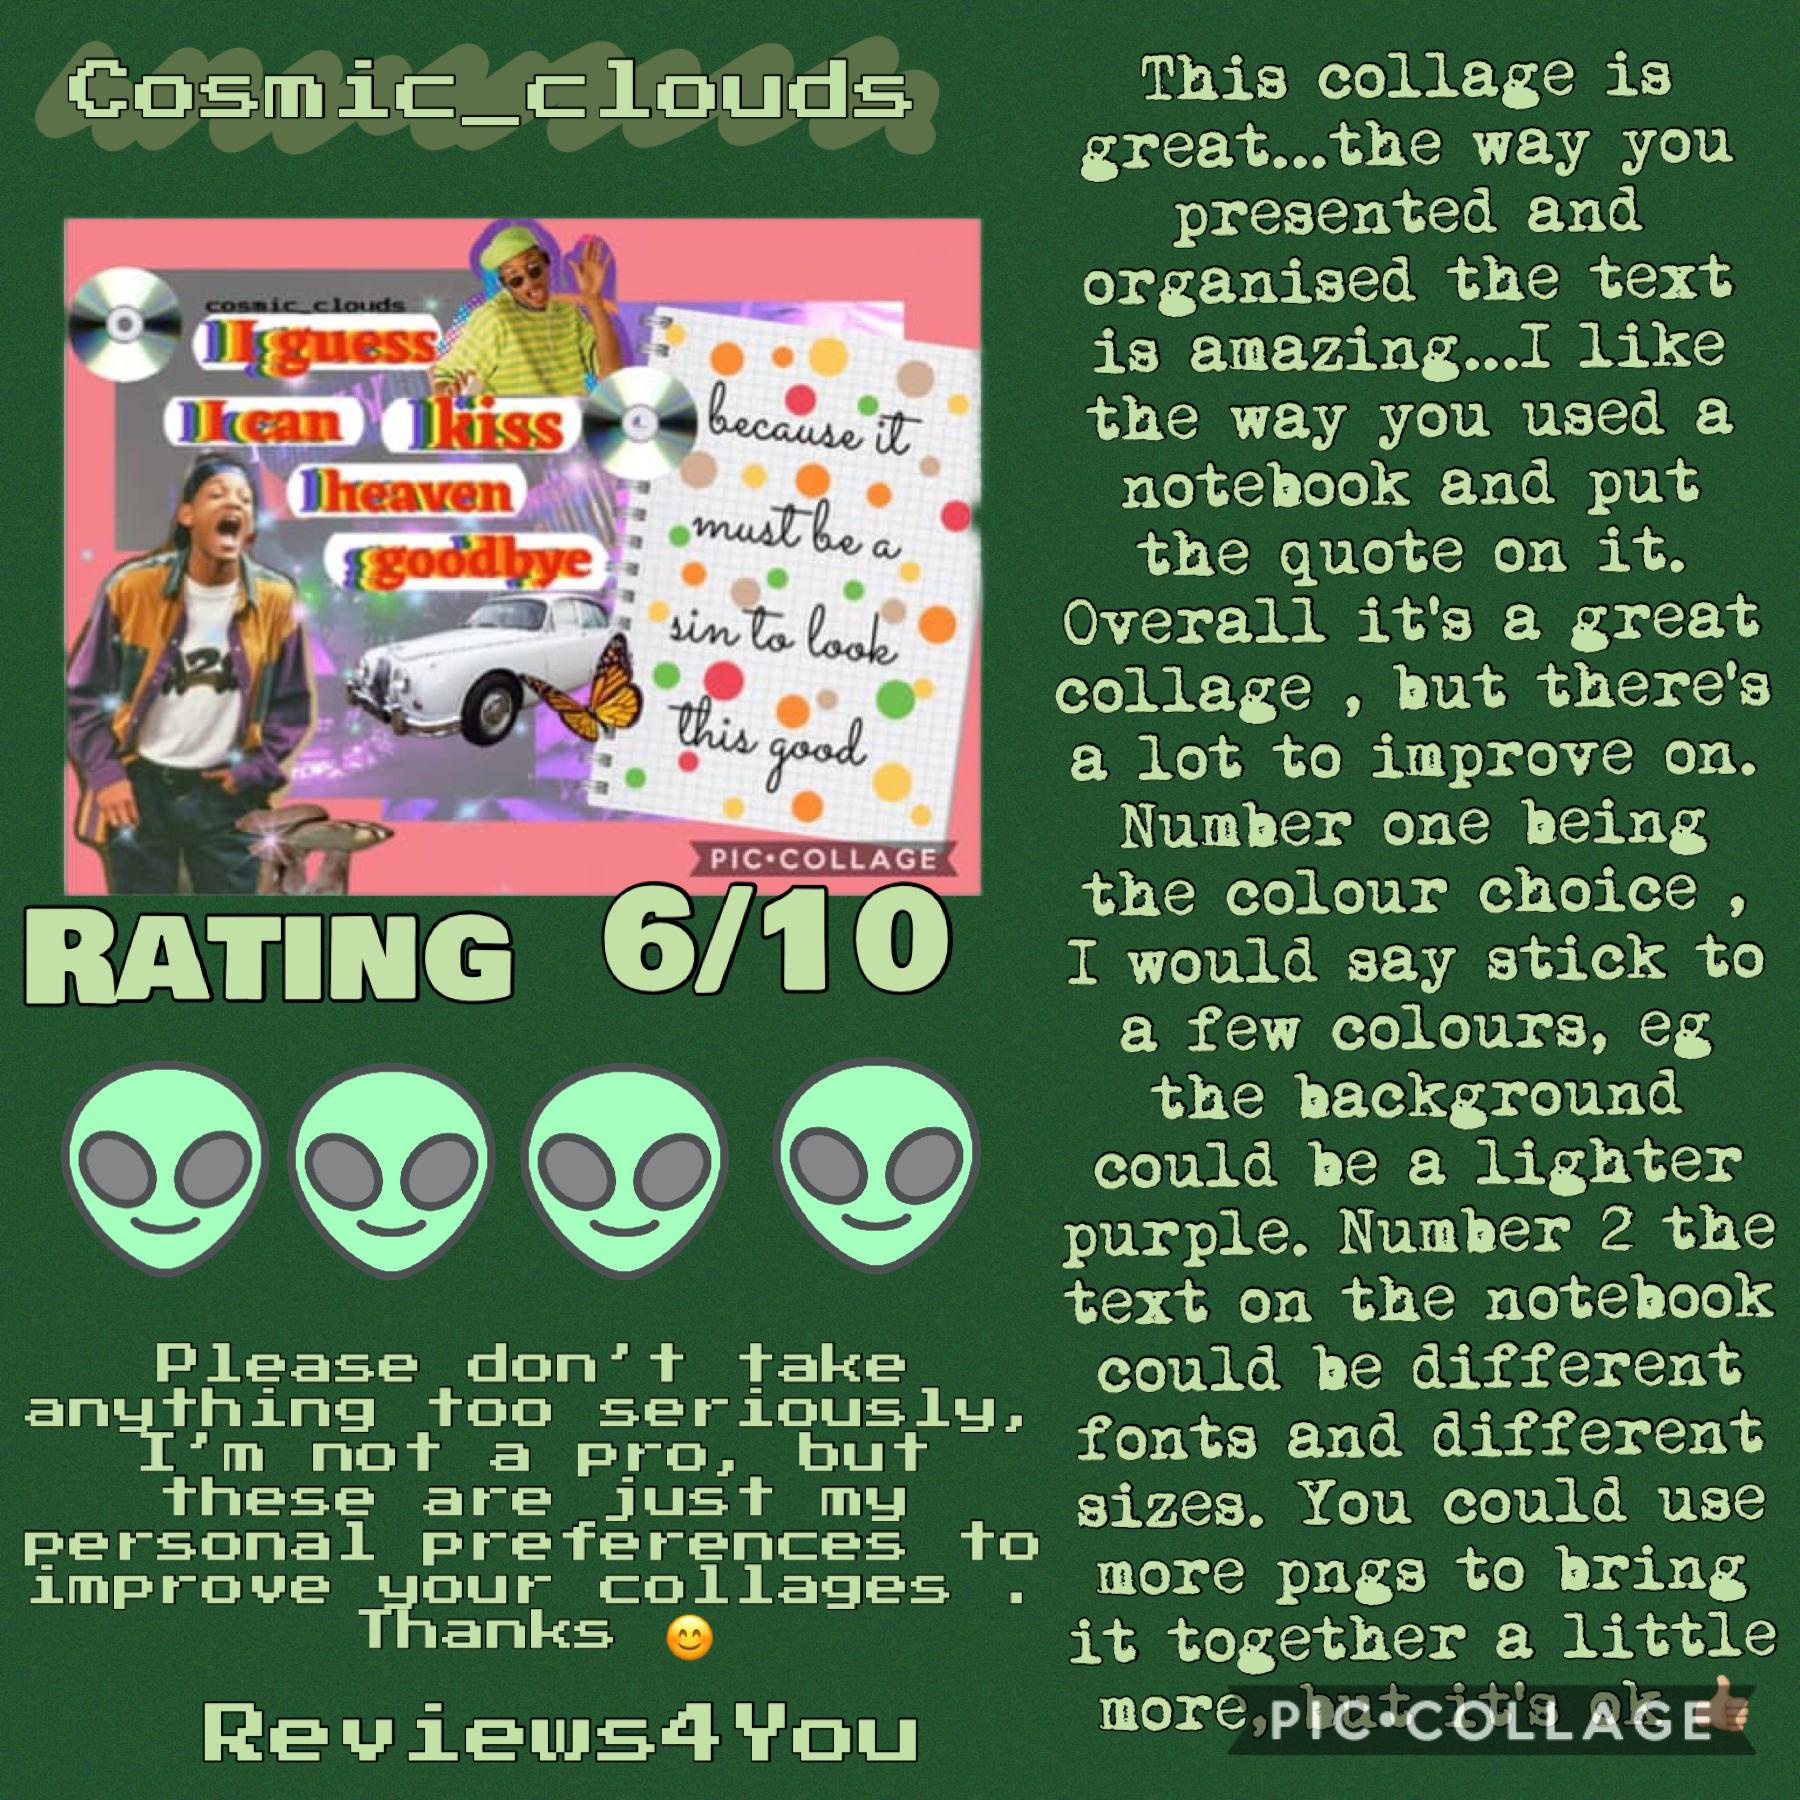 Please check cosmic_clouds thanks